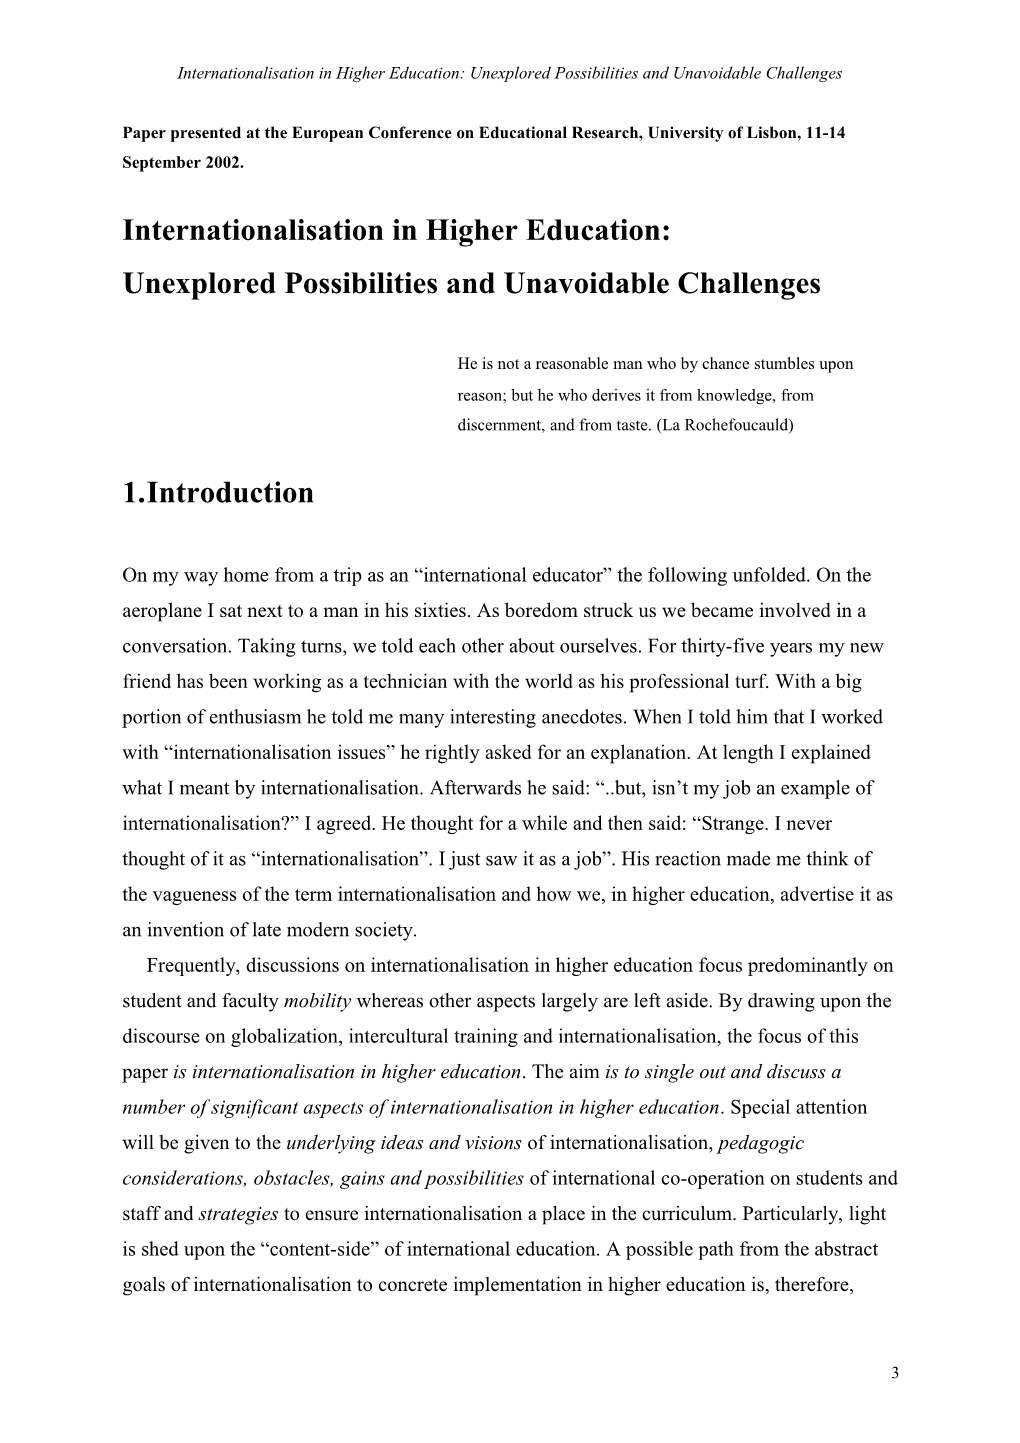 Internationalisation in Higher Education: Unexplored Possibilities and Unavoidable Challenges